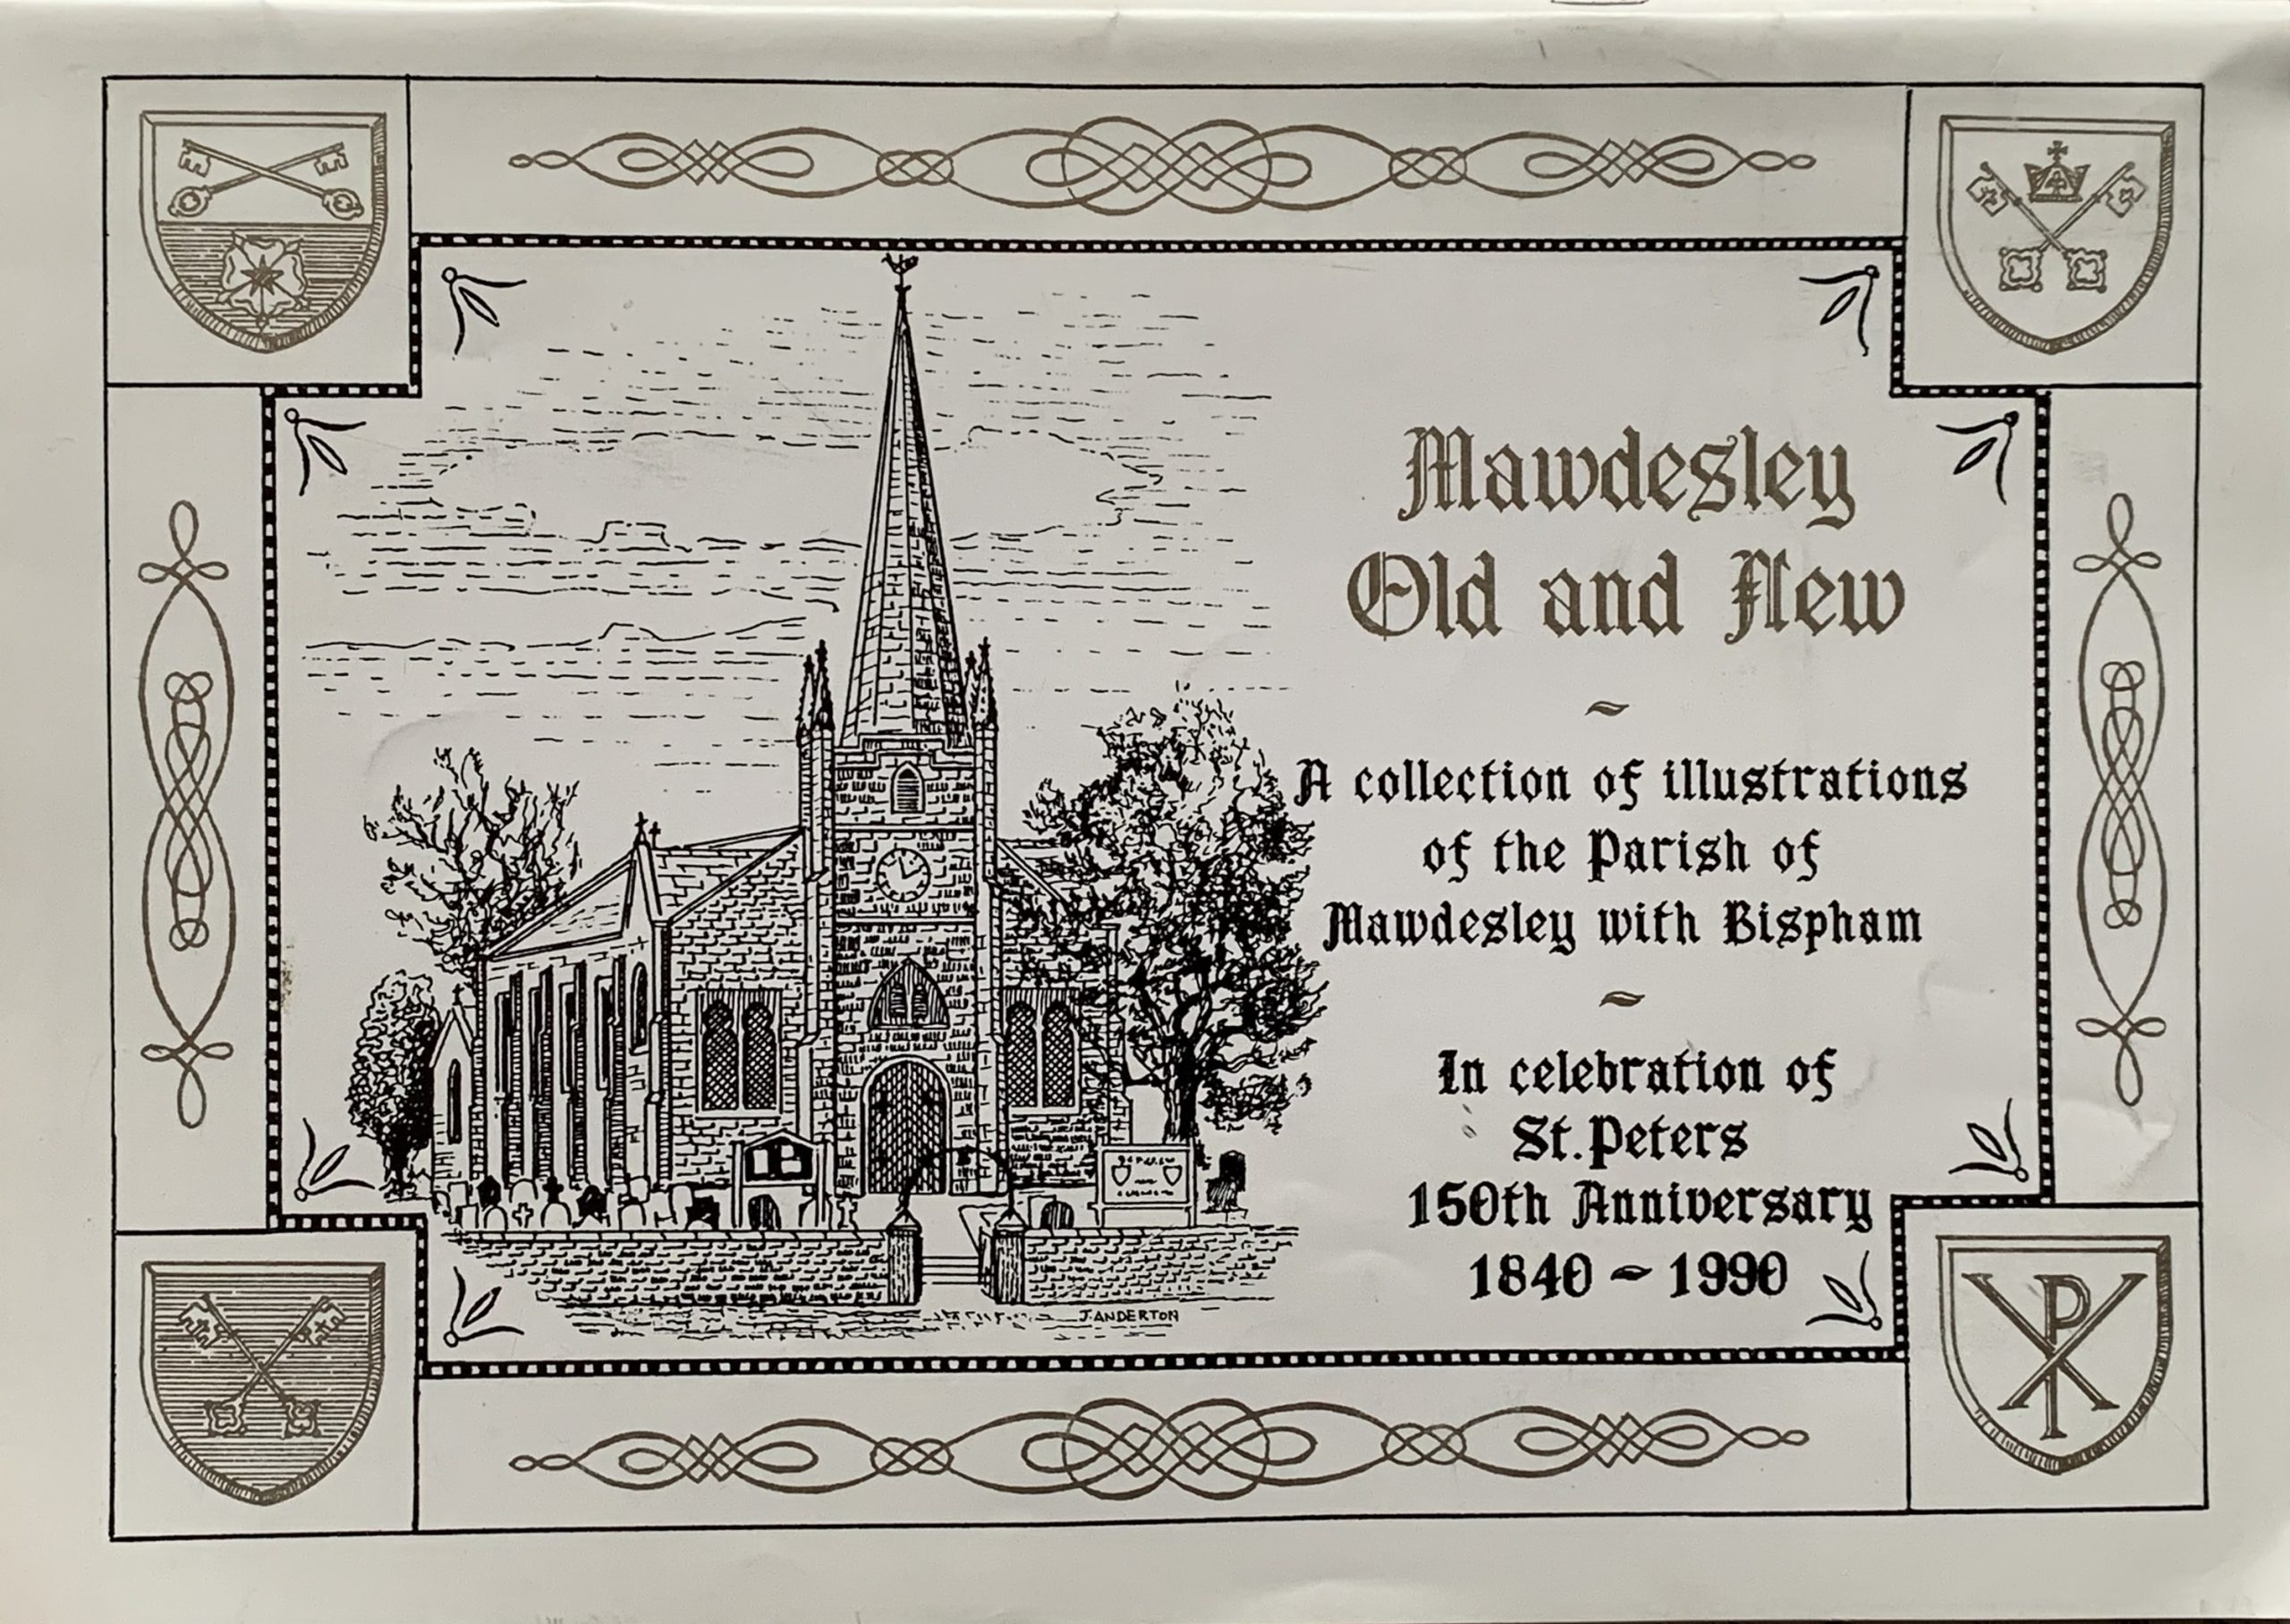 Mawdesley Old and New: A Collection of Illustrations of the Parish of Mawdesley with Bispham By James Anderton